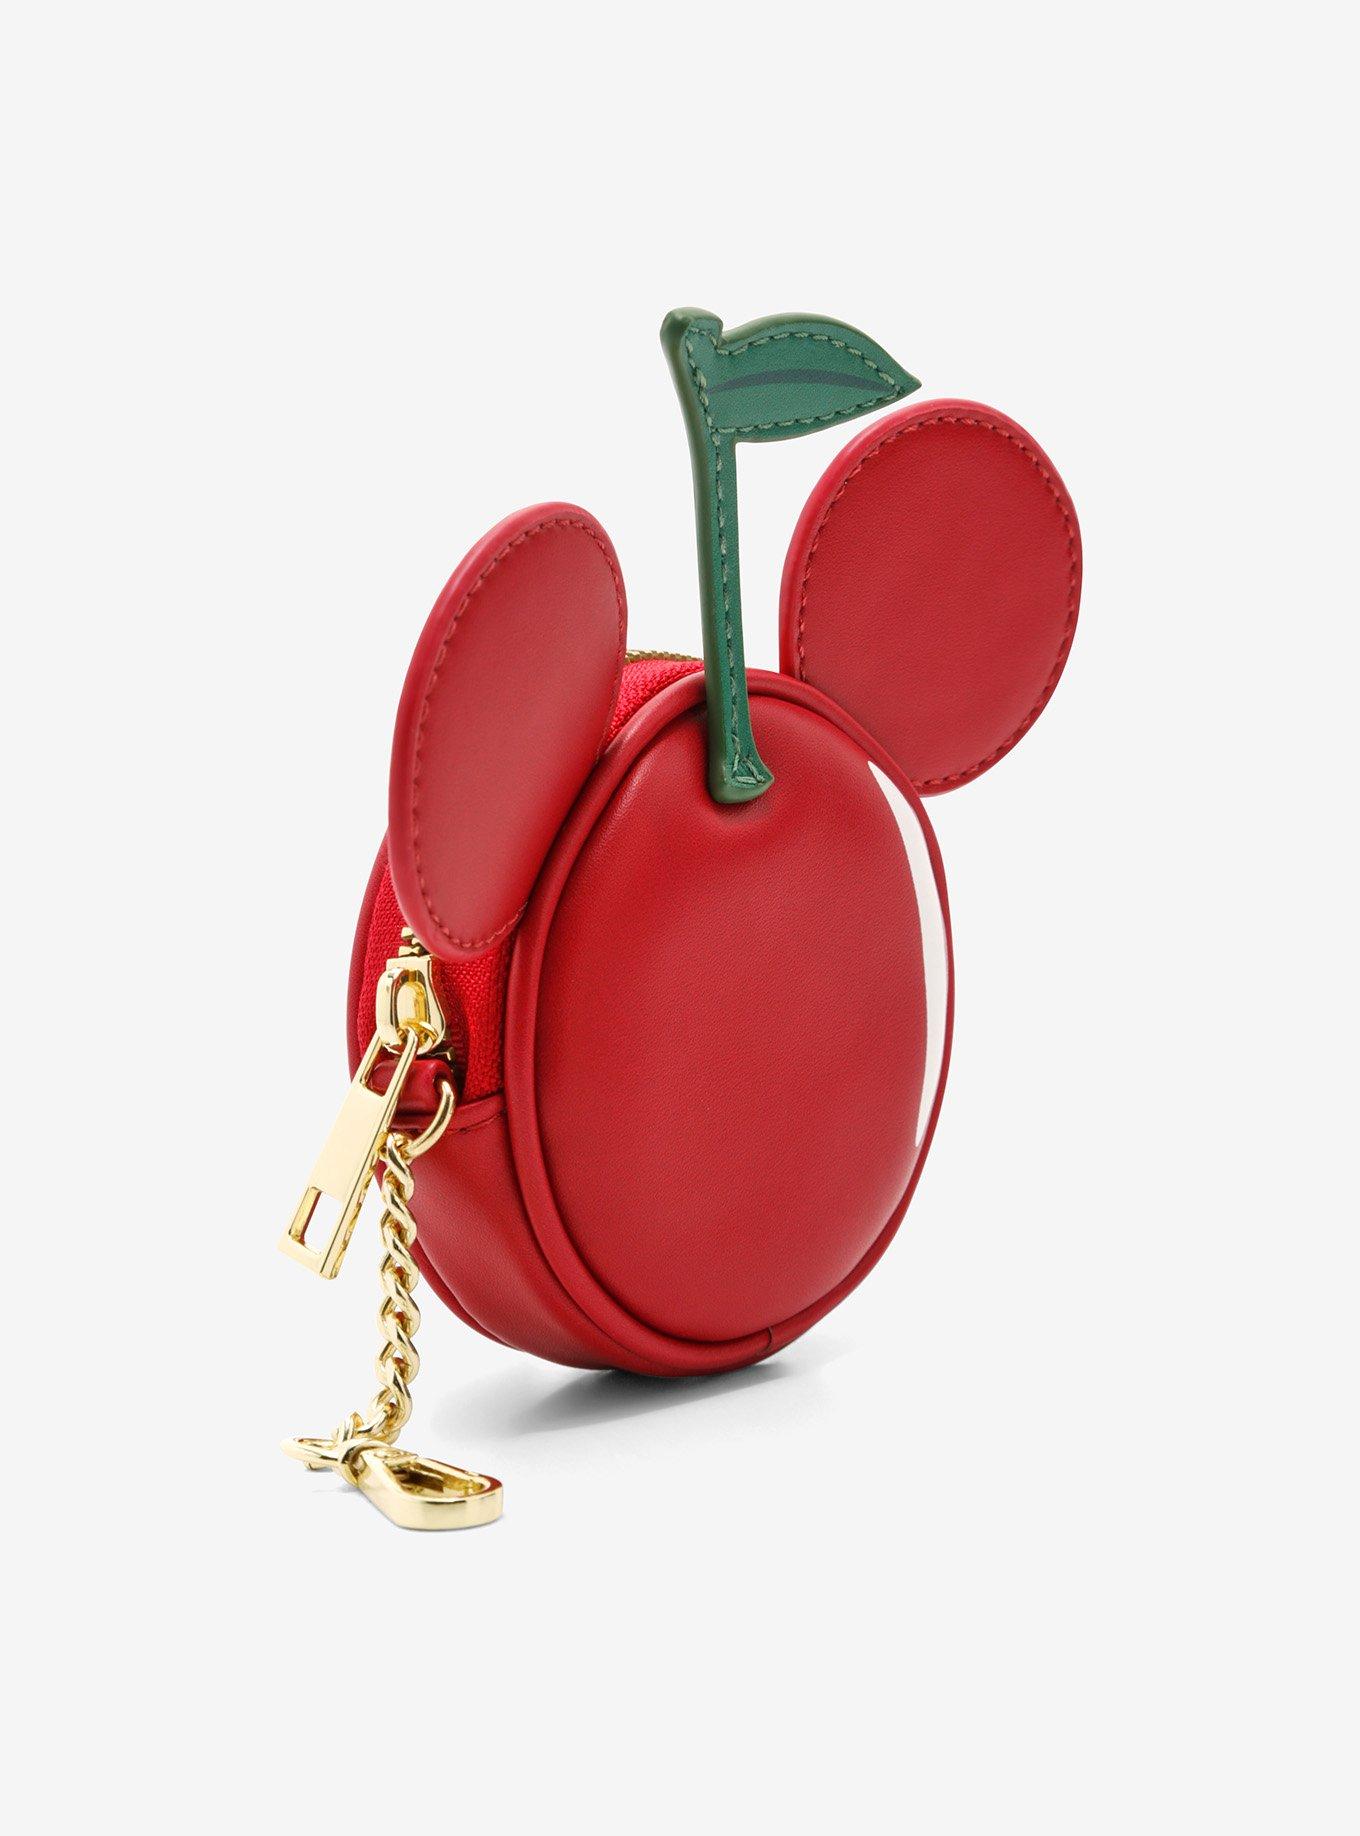 Her Universe Disney Mickey Mouse Cherry Coin Purse